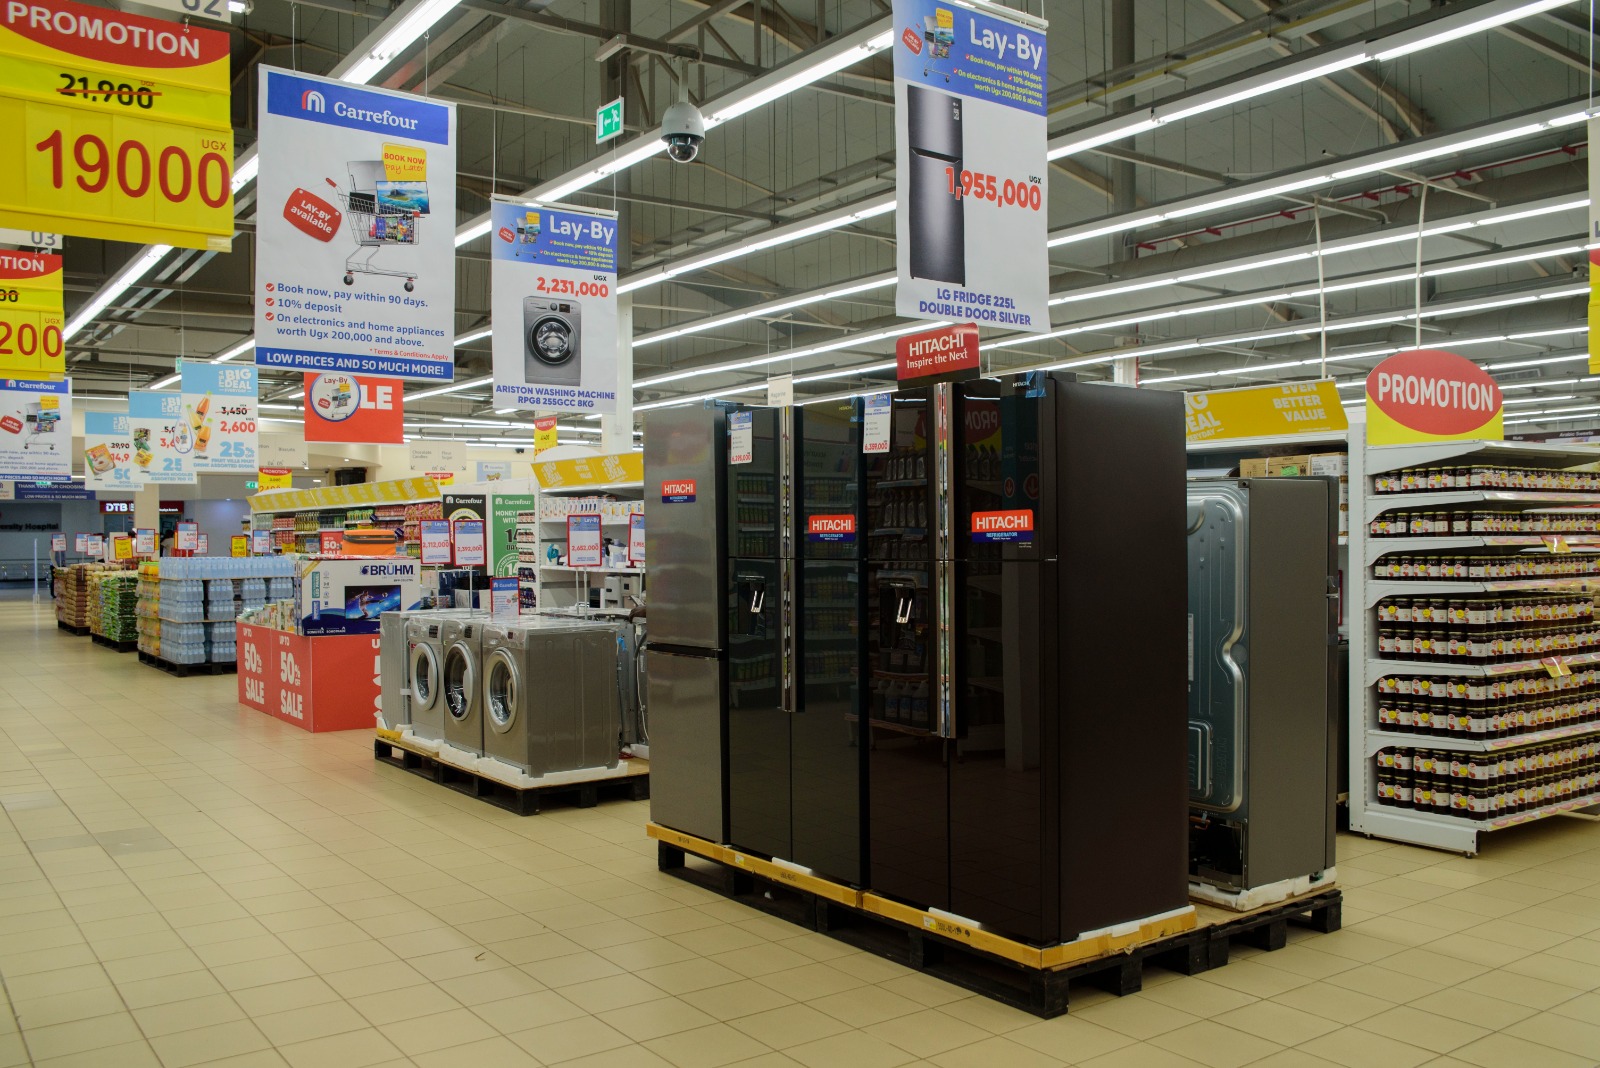 Carrefour’s Layby Service: The Convenient and Affordable Way to Shop